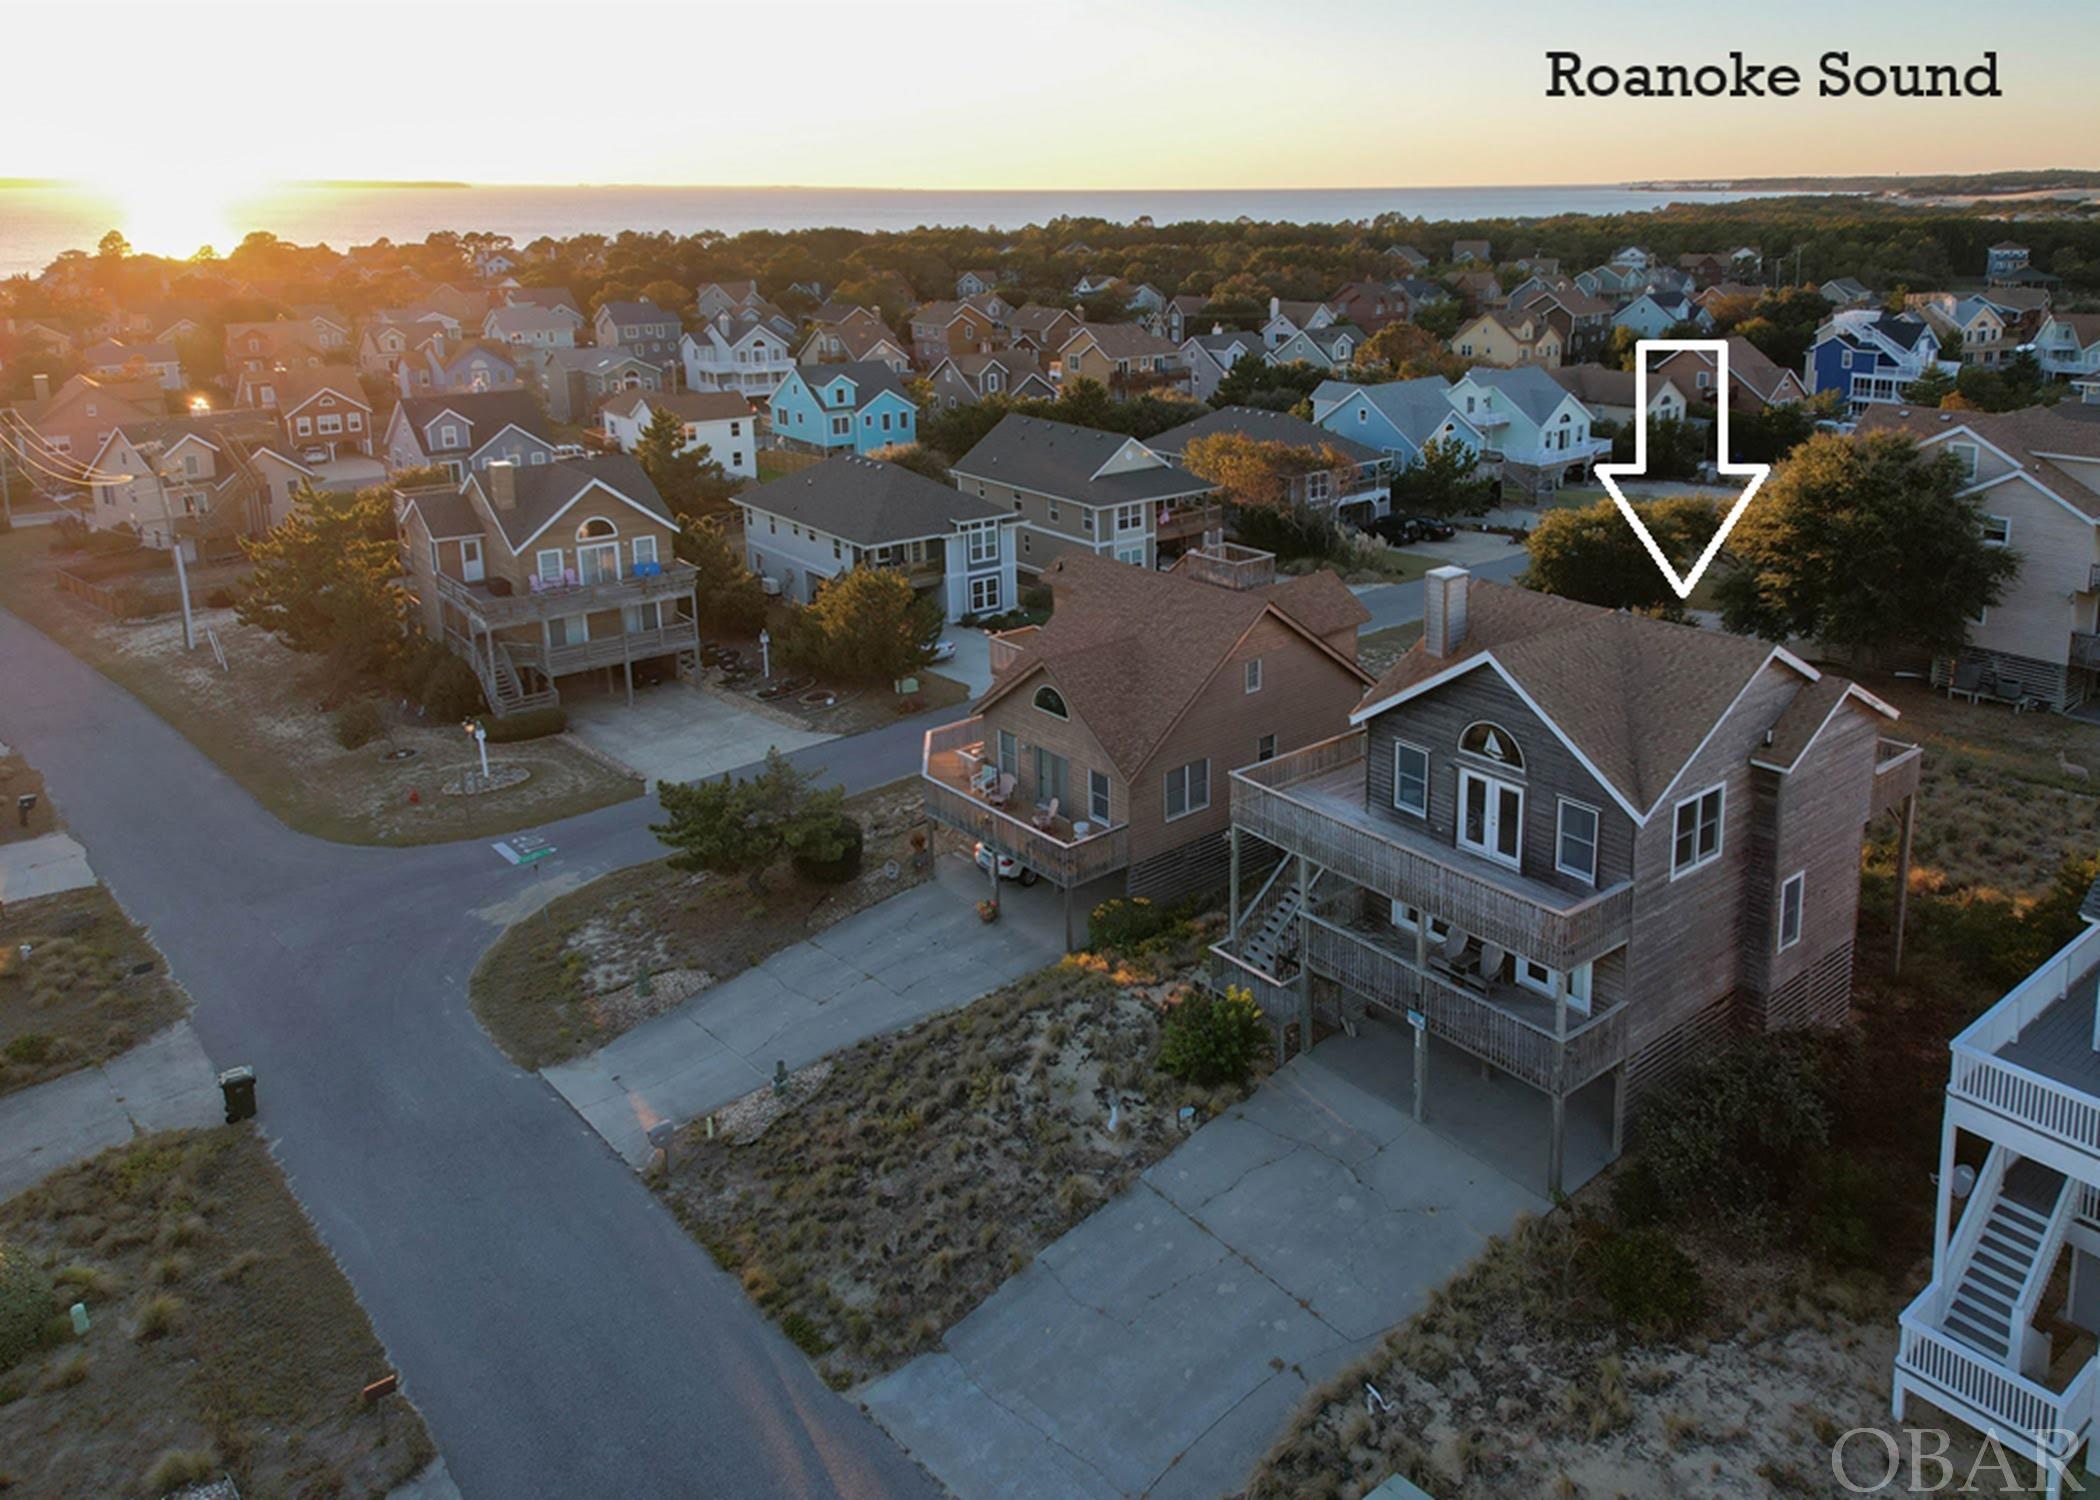 ON TOP OF THE OBX!  Views AND Location!  Check out this new listing today!  With the one-of-a-kind views this lot and home has, this property is extraordinary!  The panoramic ocean, sound, and Jockey’s ridge views are breathtaking!  This home is situated on one of the highest points in the Southridge Subdivision.  An excellent floor plan and views from every top floor window!  This home is ready to make your own!  The ground level has a storage area, carport, outdoor shower, and a dry entry.  The middle level has three spacious bedrooms, a full bathroom, and a large laundry room.  The top floor is open and spacious! The top floor has a living and dining area, kitchen, powder room, and has a great master bedroom.  Expansive decks and views on both levels!  Imagine the gorgeous sunrises and sunsets you will enjoy.   This home would make an incredible primary home, second home, or rental property.  With excellent proximity to the Jockey's Ridge State Park, Nags Head Beaches, and wonderful restaurants, your friends, family, and guests will be visiting all of the time!  Call now for more information!!